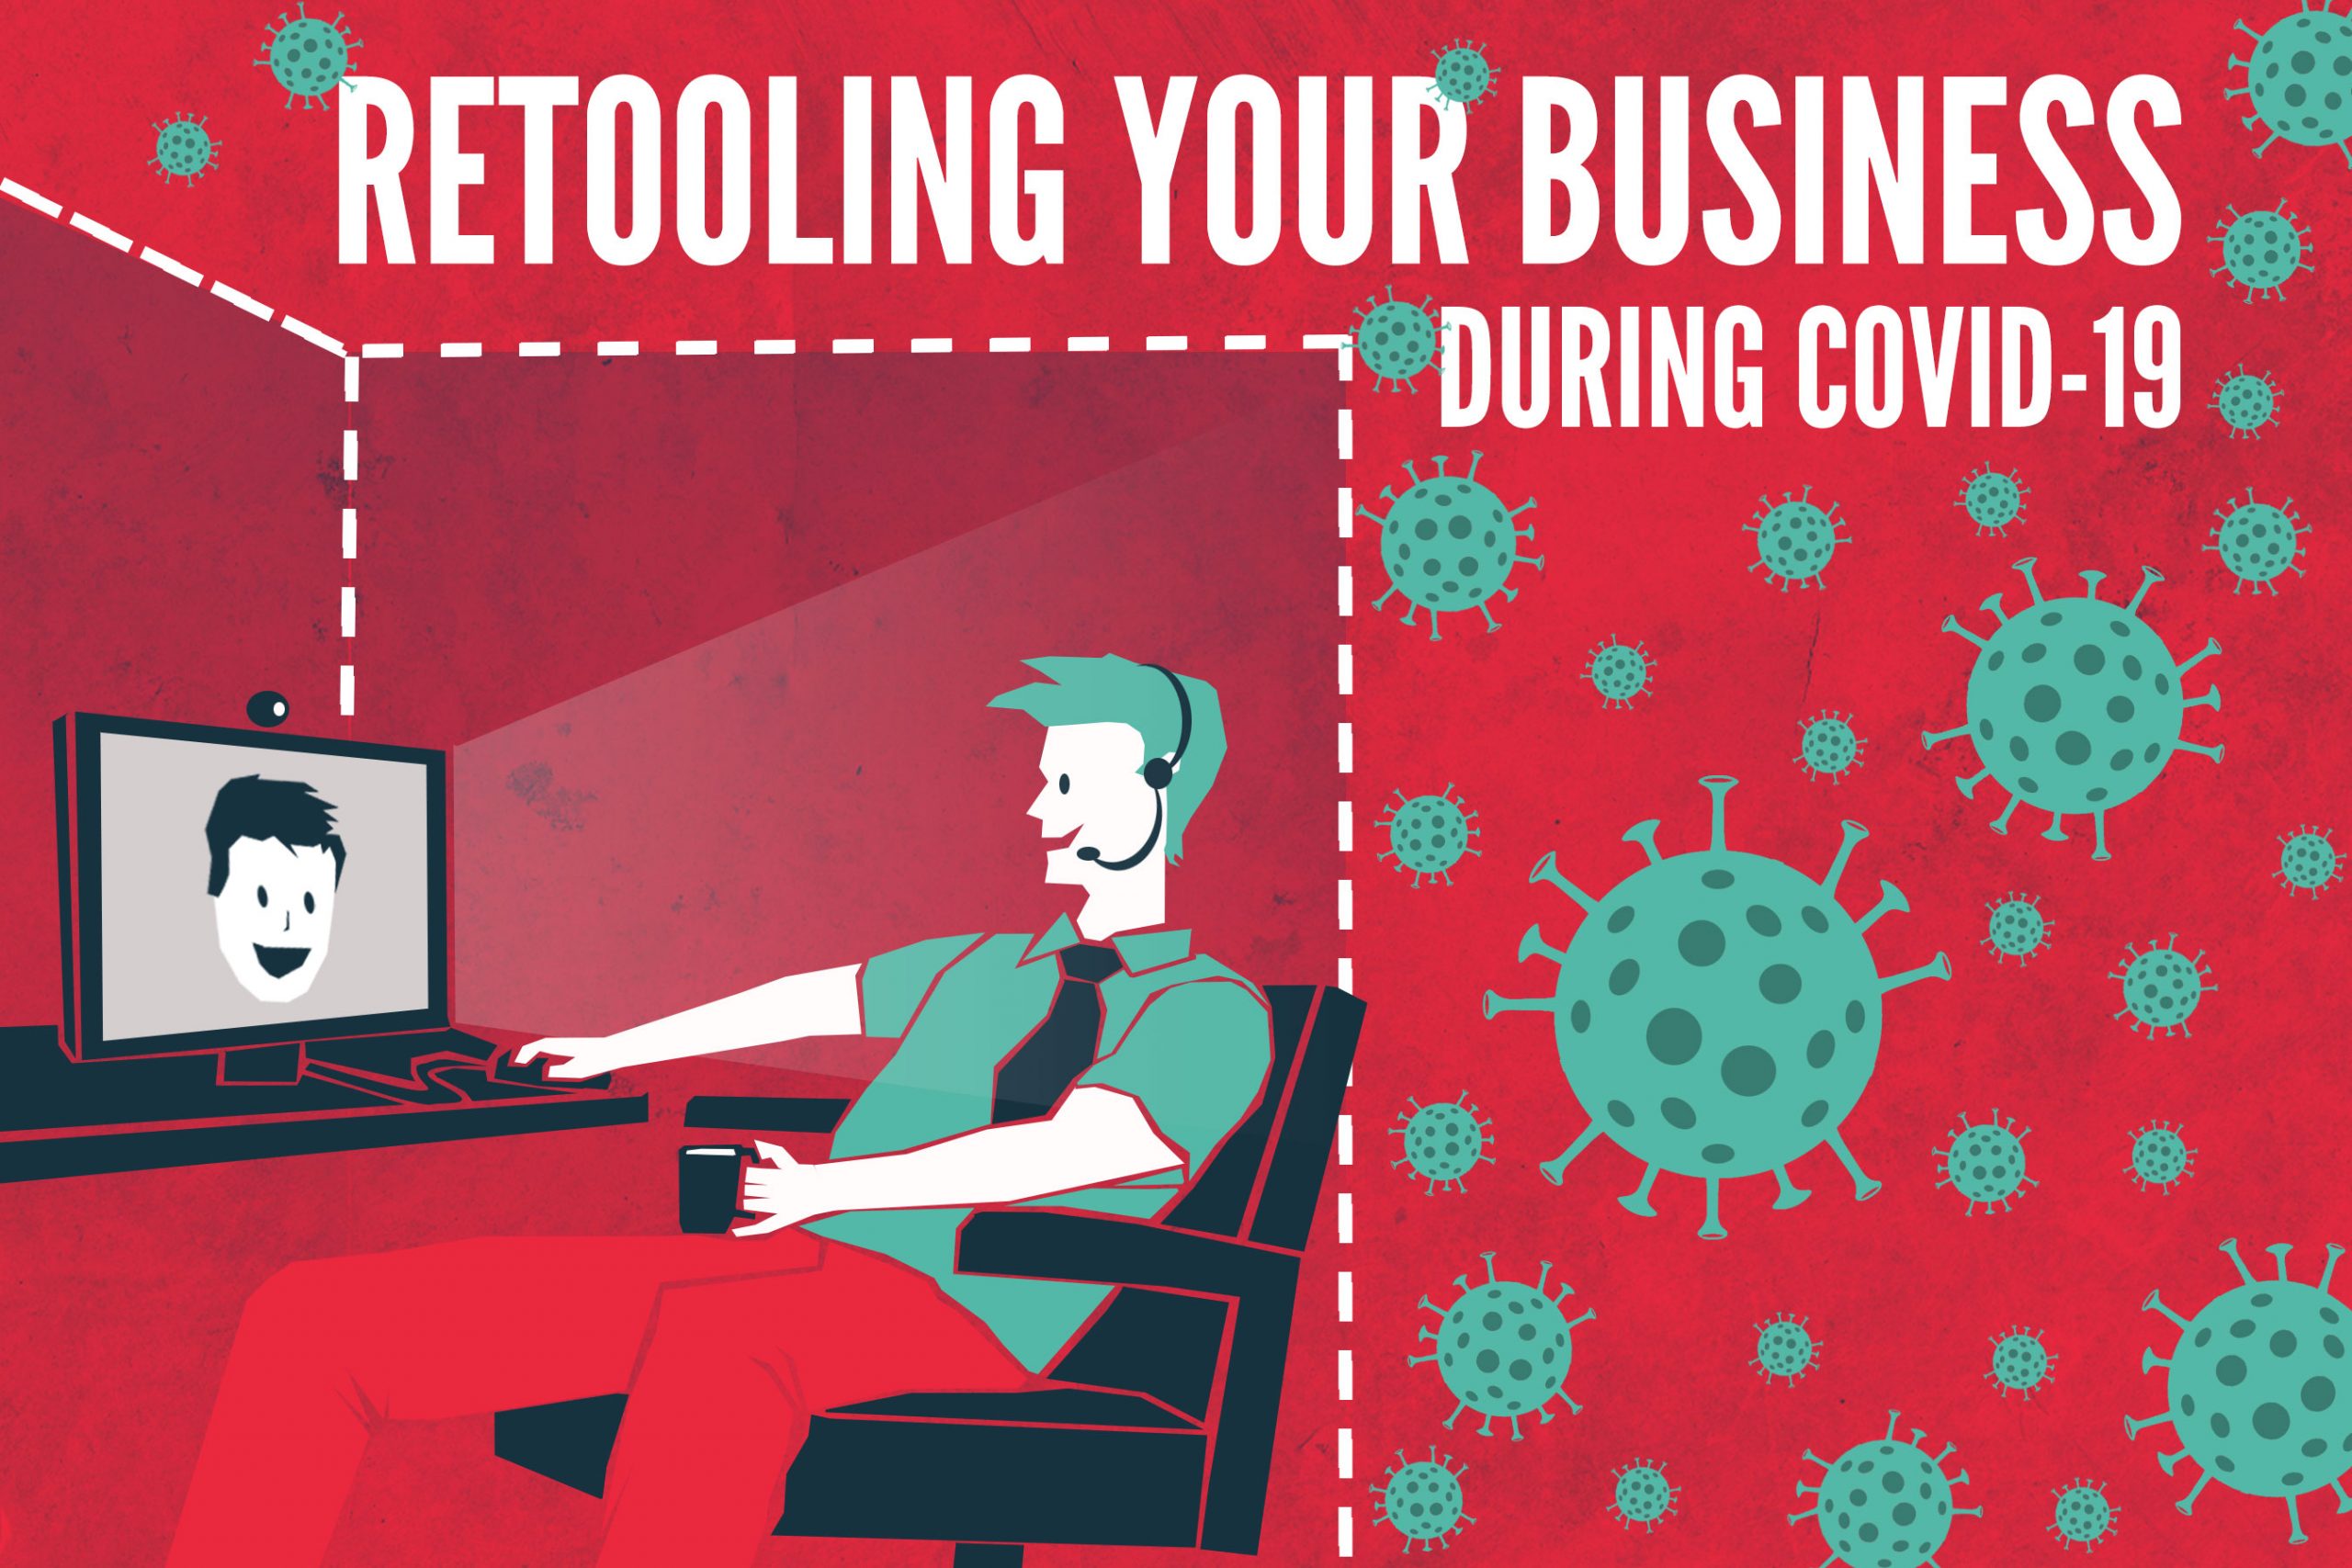 Retooling your Business During COVID-19